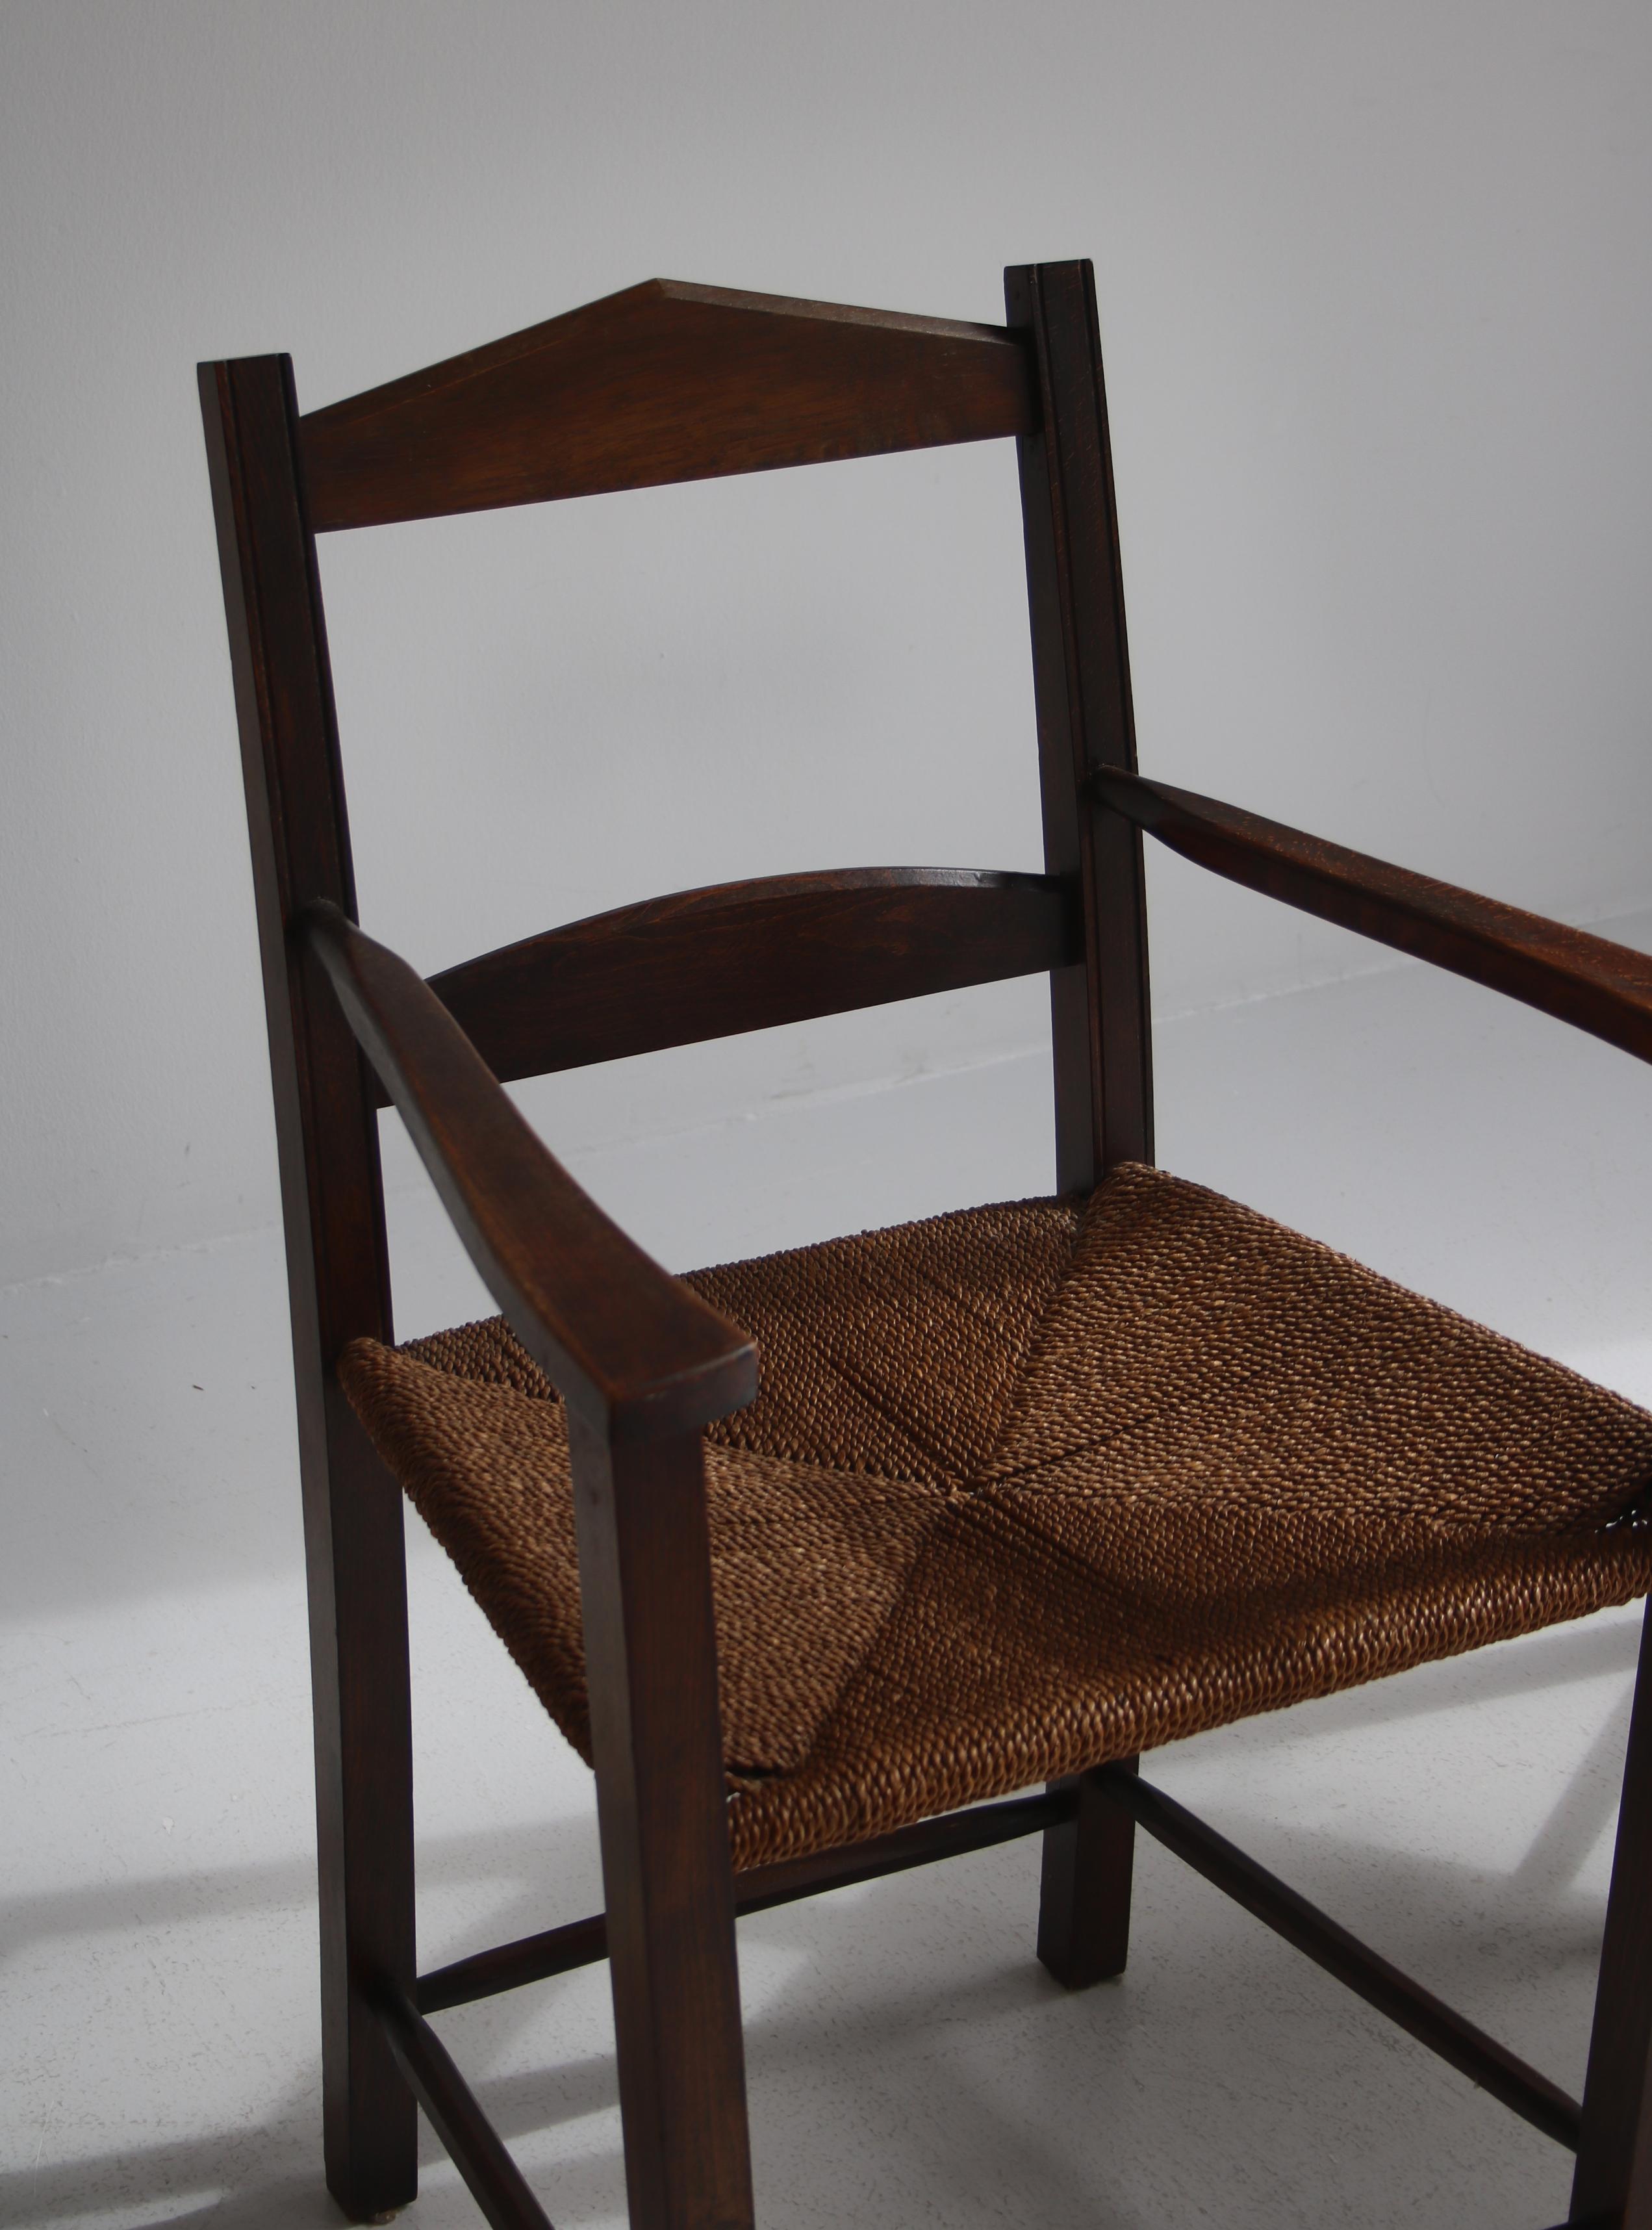 Pair of Armchairs in Dark Stained Pine and Seagrass Danish Cabinetmaker, 1940s For Sale 9